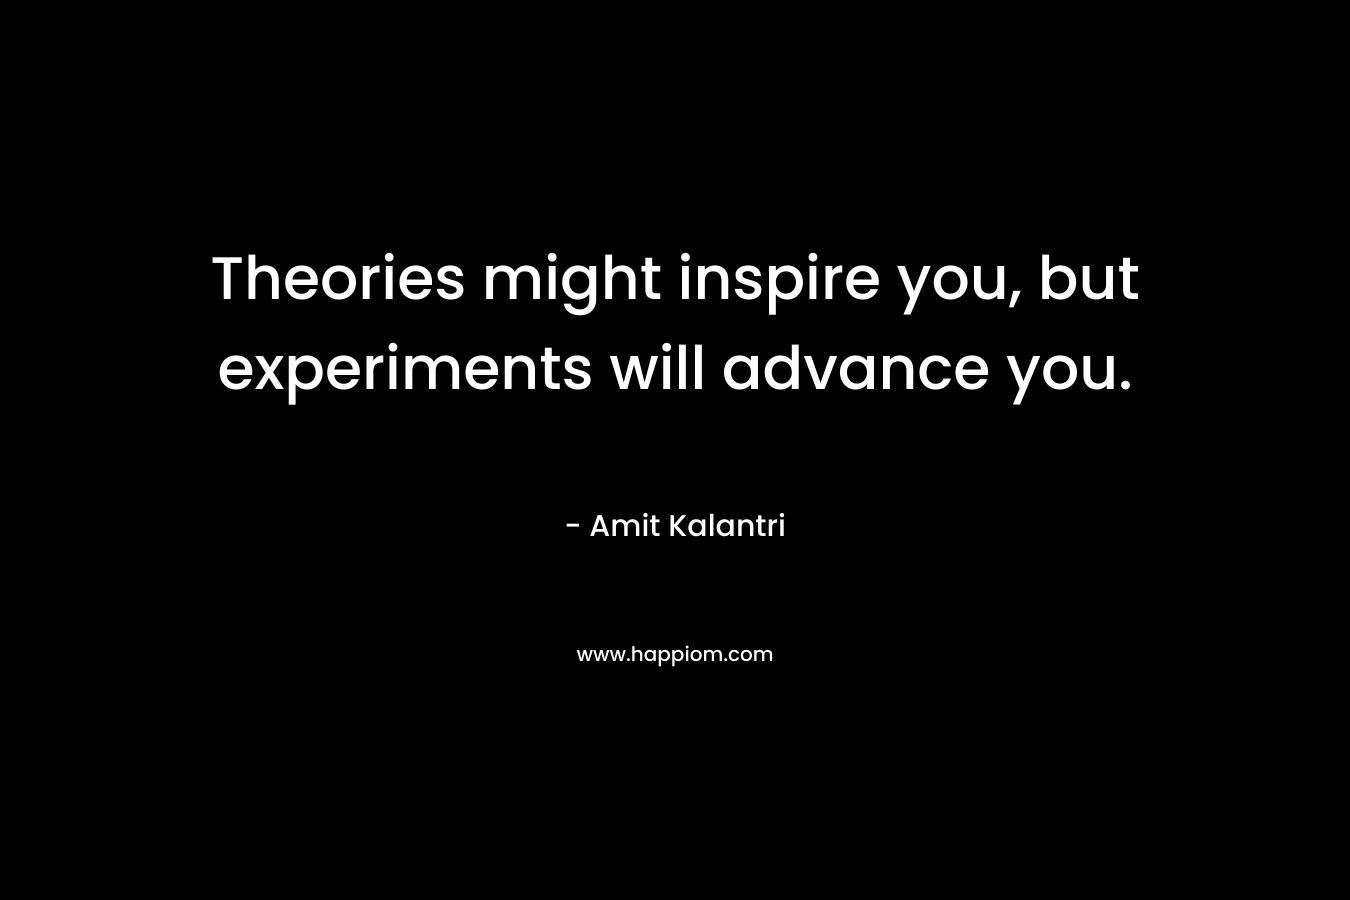 Theories might inspire you, but experiments will advance you. – Amit Kalantri